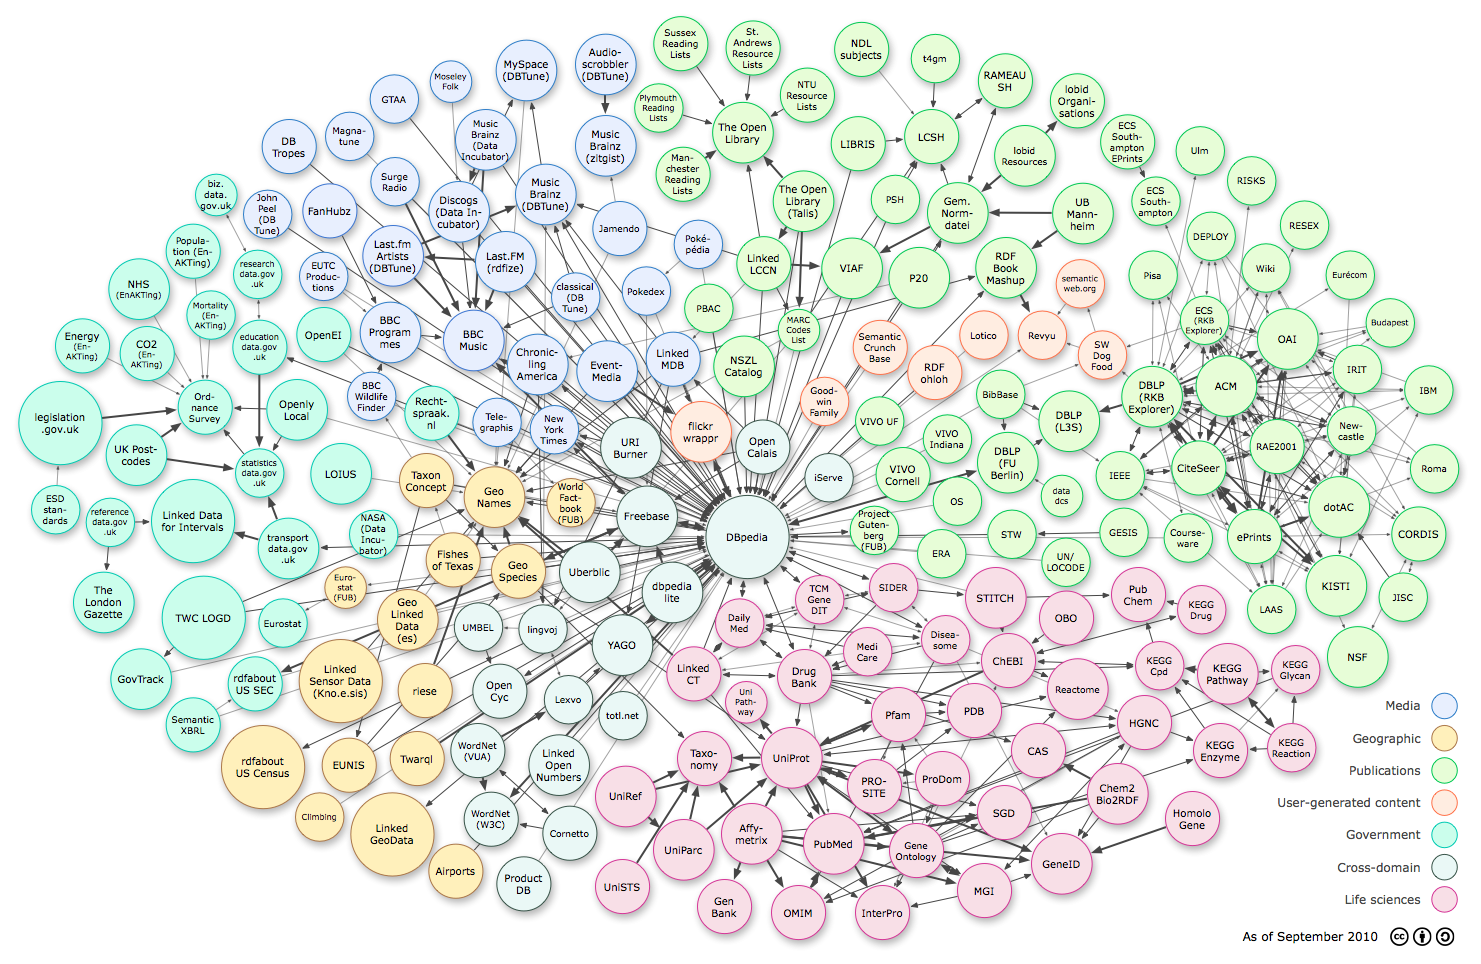 Linked Open Data cloud diagram as of 2010-09